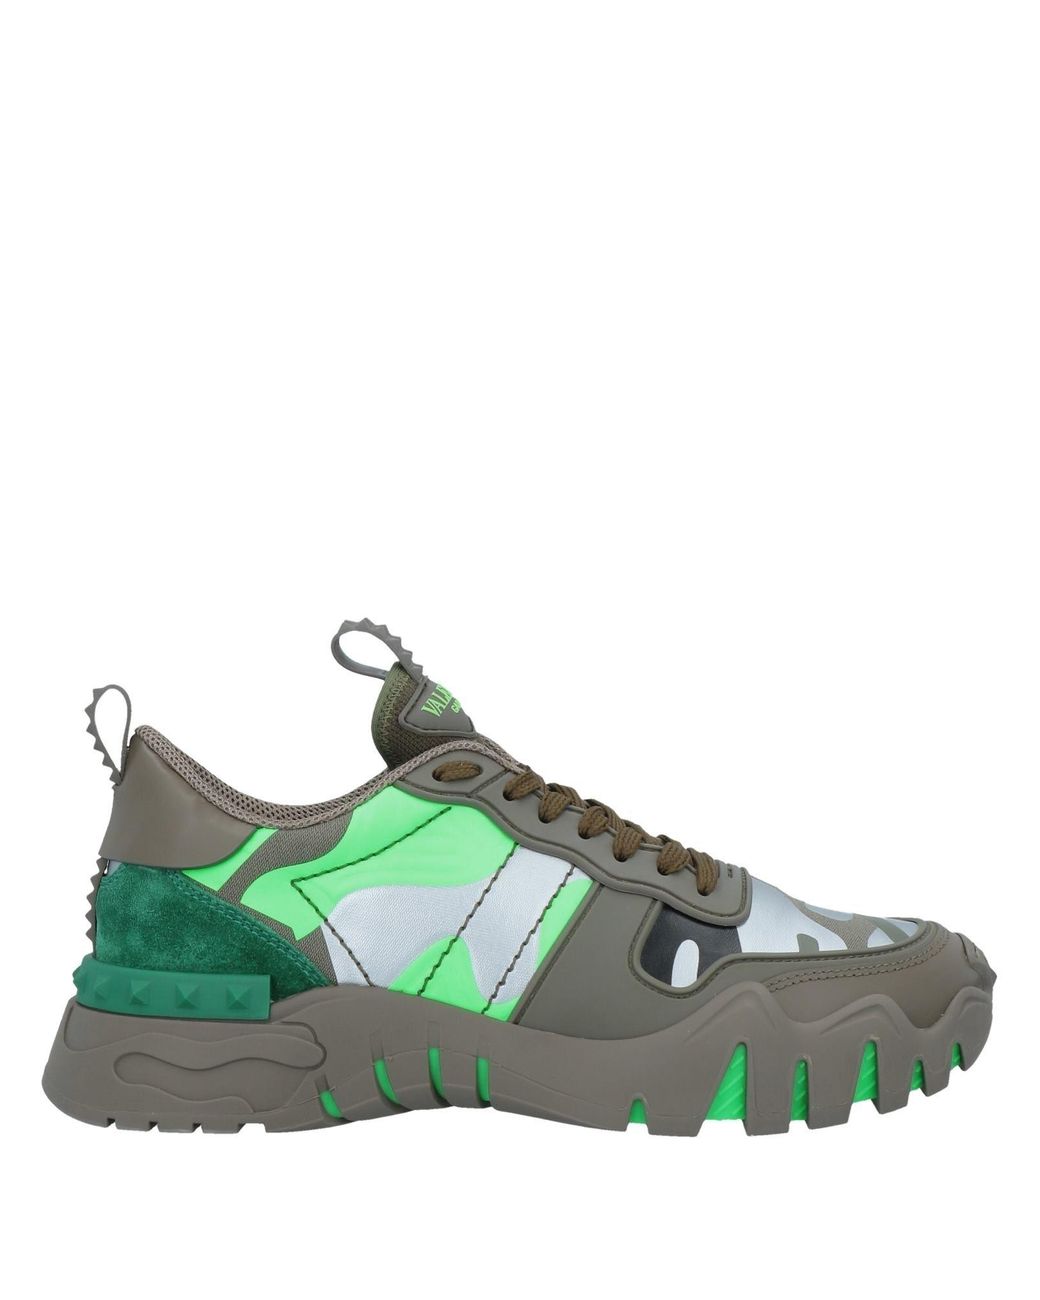 Valentino Garavani Low-tops & Sneakers in Military Green (Green) for ...